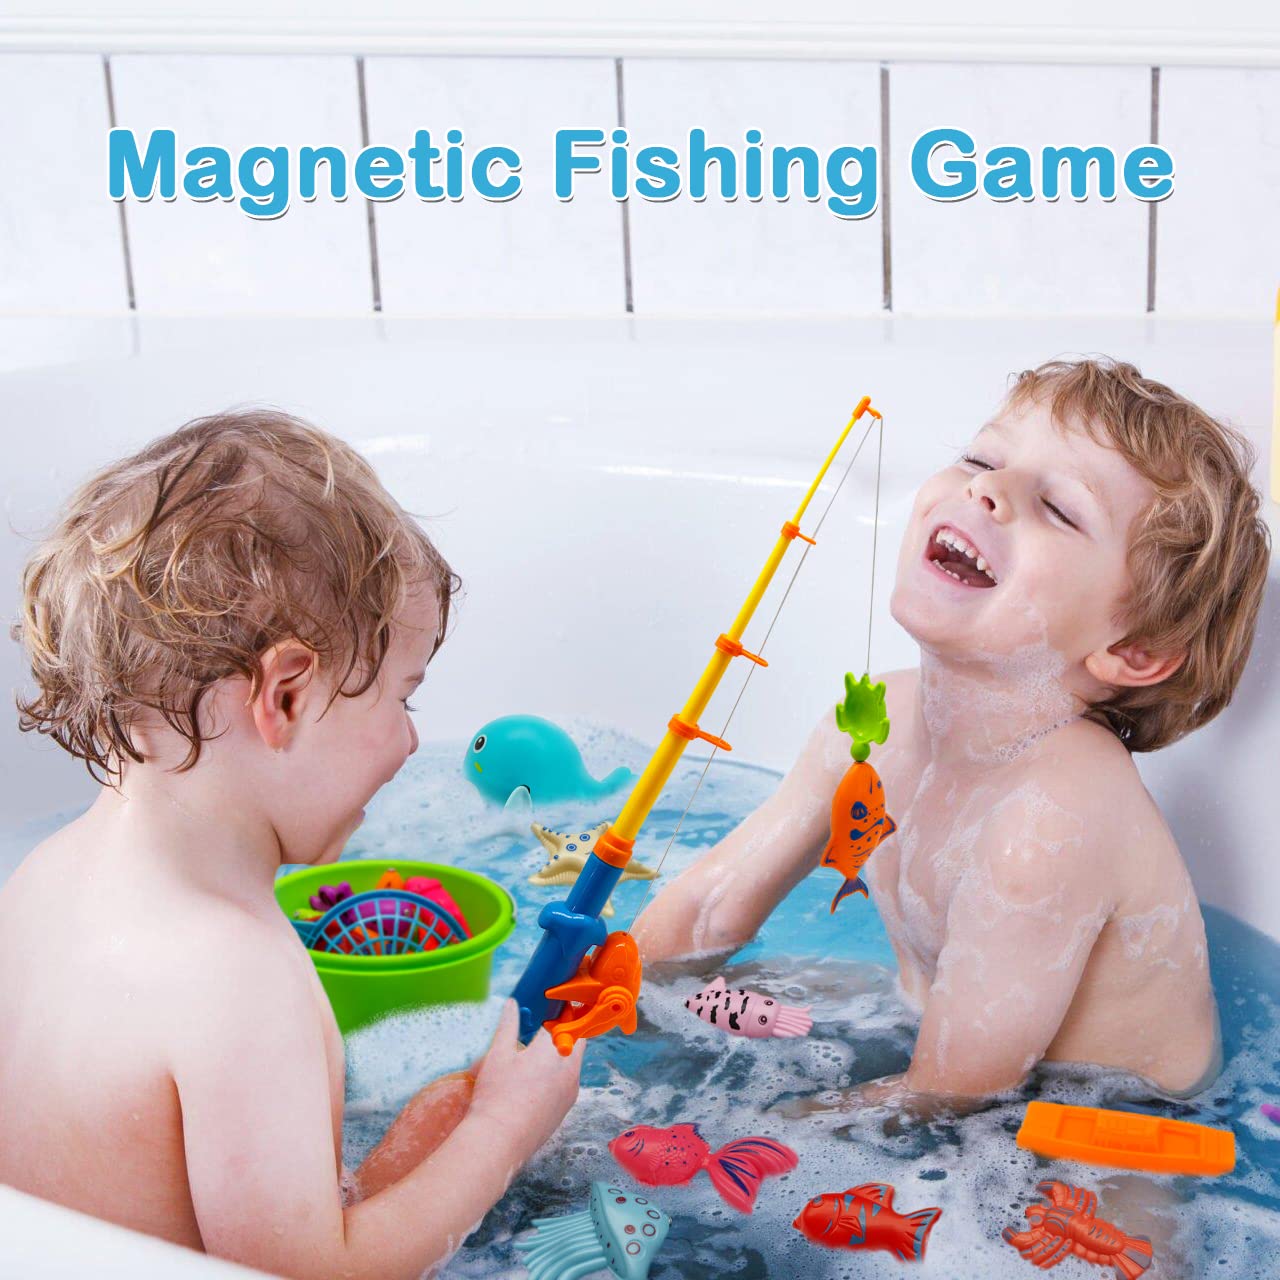 Kiditos Magnetic Fishing Toys Game Set with 4 Bathtub Tub Toys, Swimming Pool Toy, Colorful Ocean Sea Animals, Fishing Pole Rod Net, Fishing Game for Toddler Kids Age 3 4 5 6, 2 -4 Players Gift